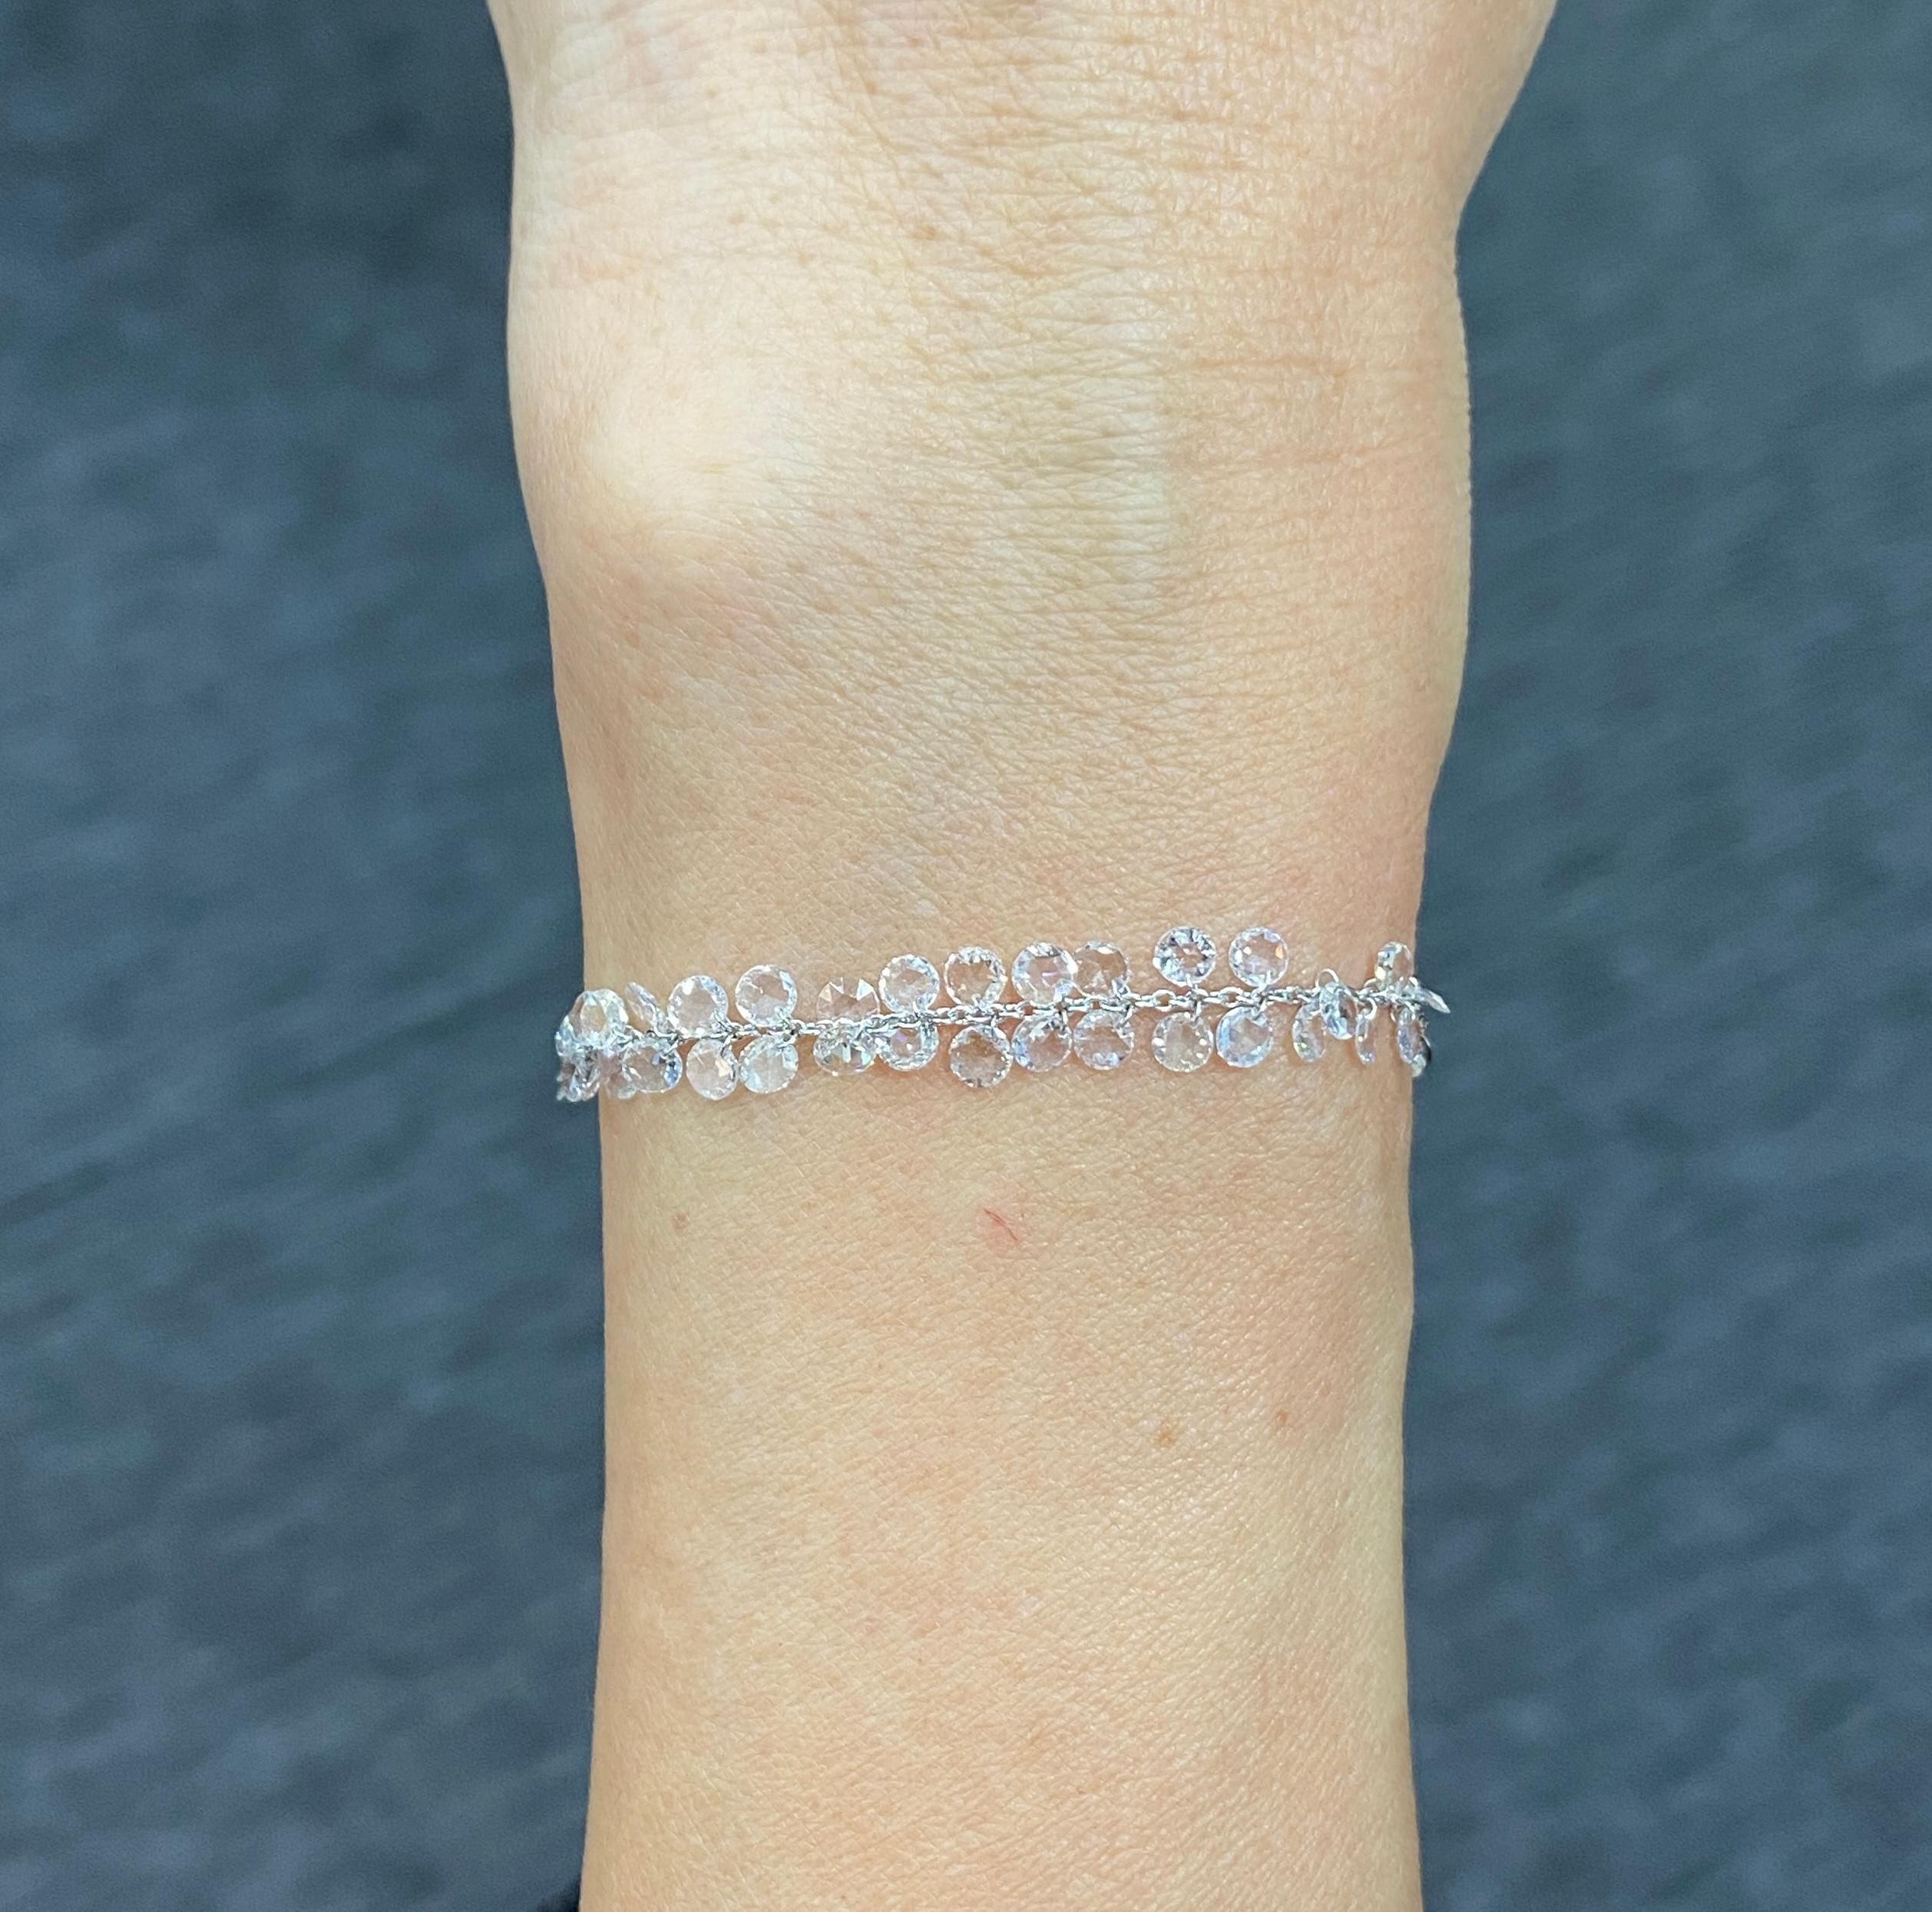 JR 2.00 Carat Dangling Rose Cut Diamond 18 Karat White Gold Bracelet

Our dangling rose-cut diamond bracelet is extremely wearable. Its versatility and classic design make it a great accompaniment to various occasions. Beautifully made with Drilled